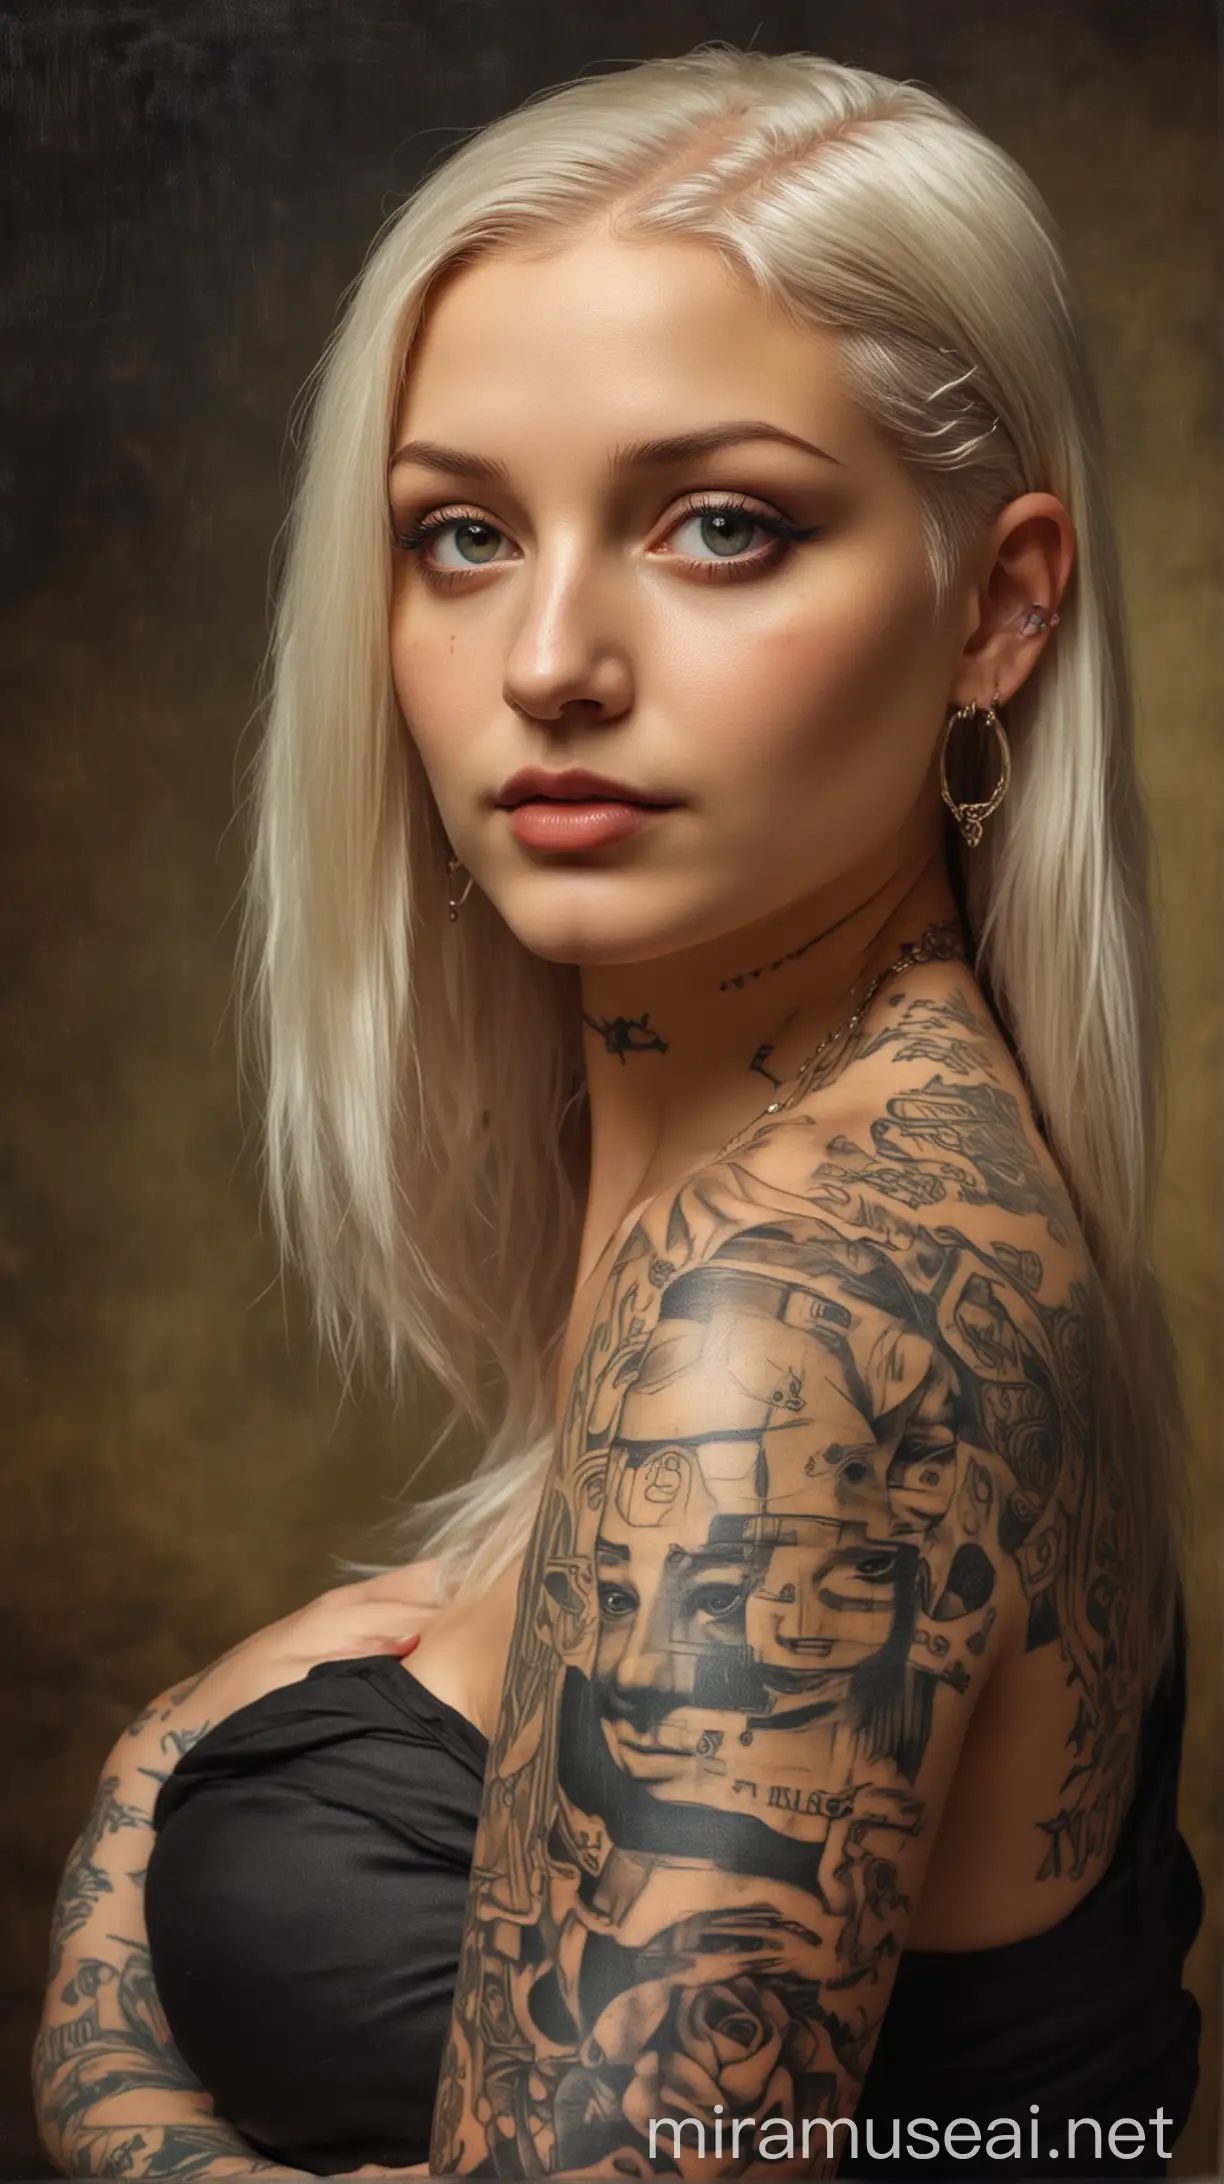 Classical Mona Lisa Contemplates Future Vision of Modern Woman with Tattoos and Piercings